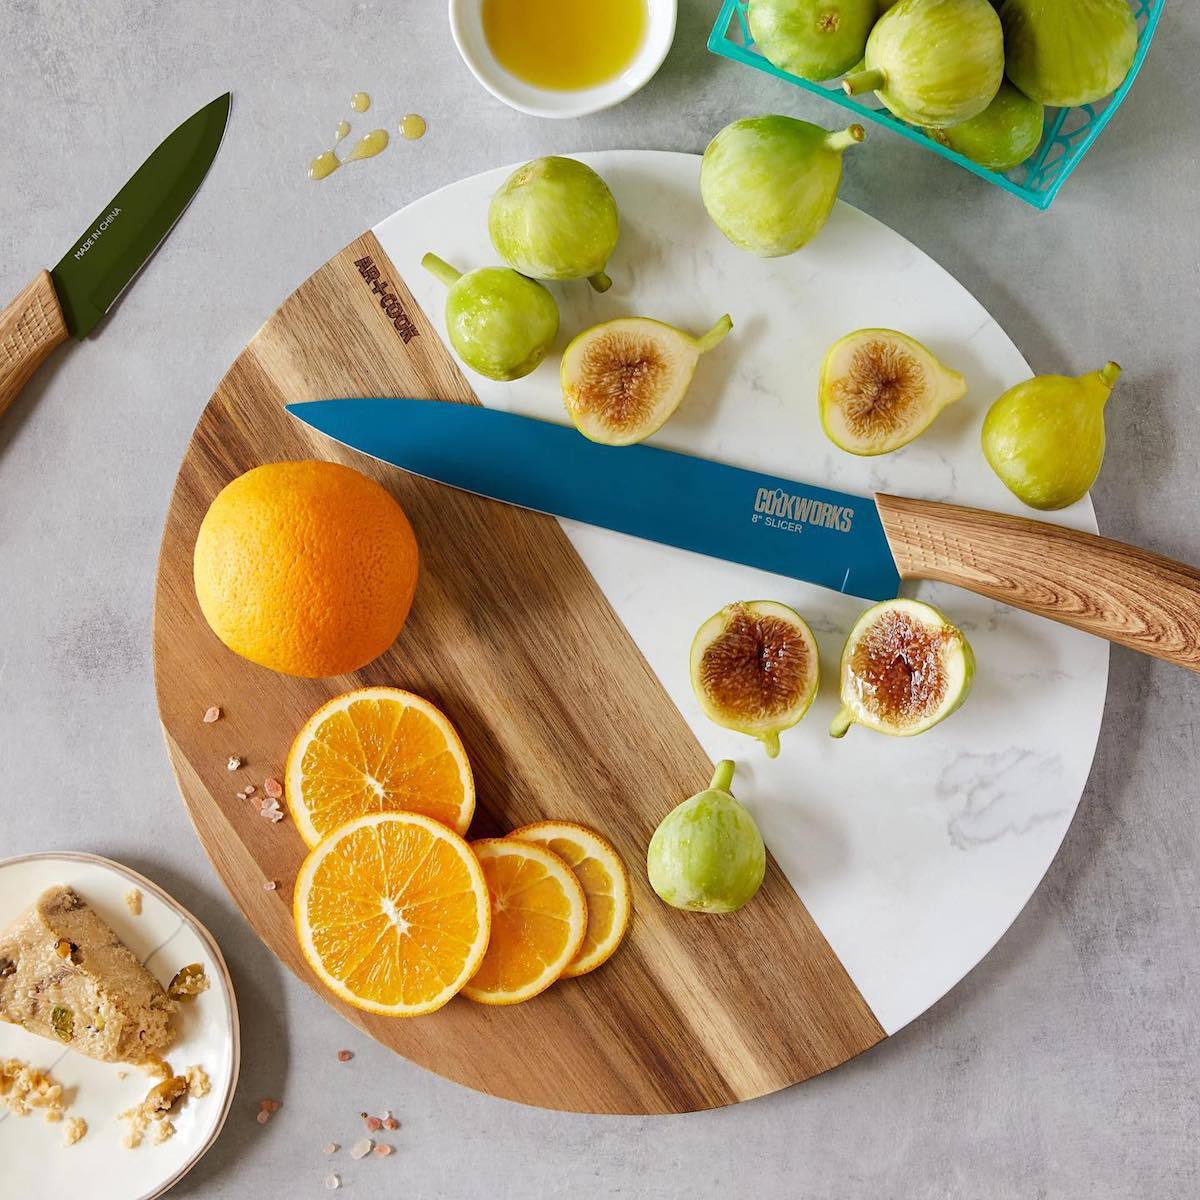 The 20 Best Spring Kitchen Gadgets To Spruce Up Your Space 